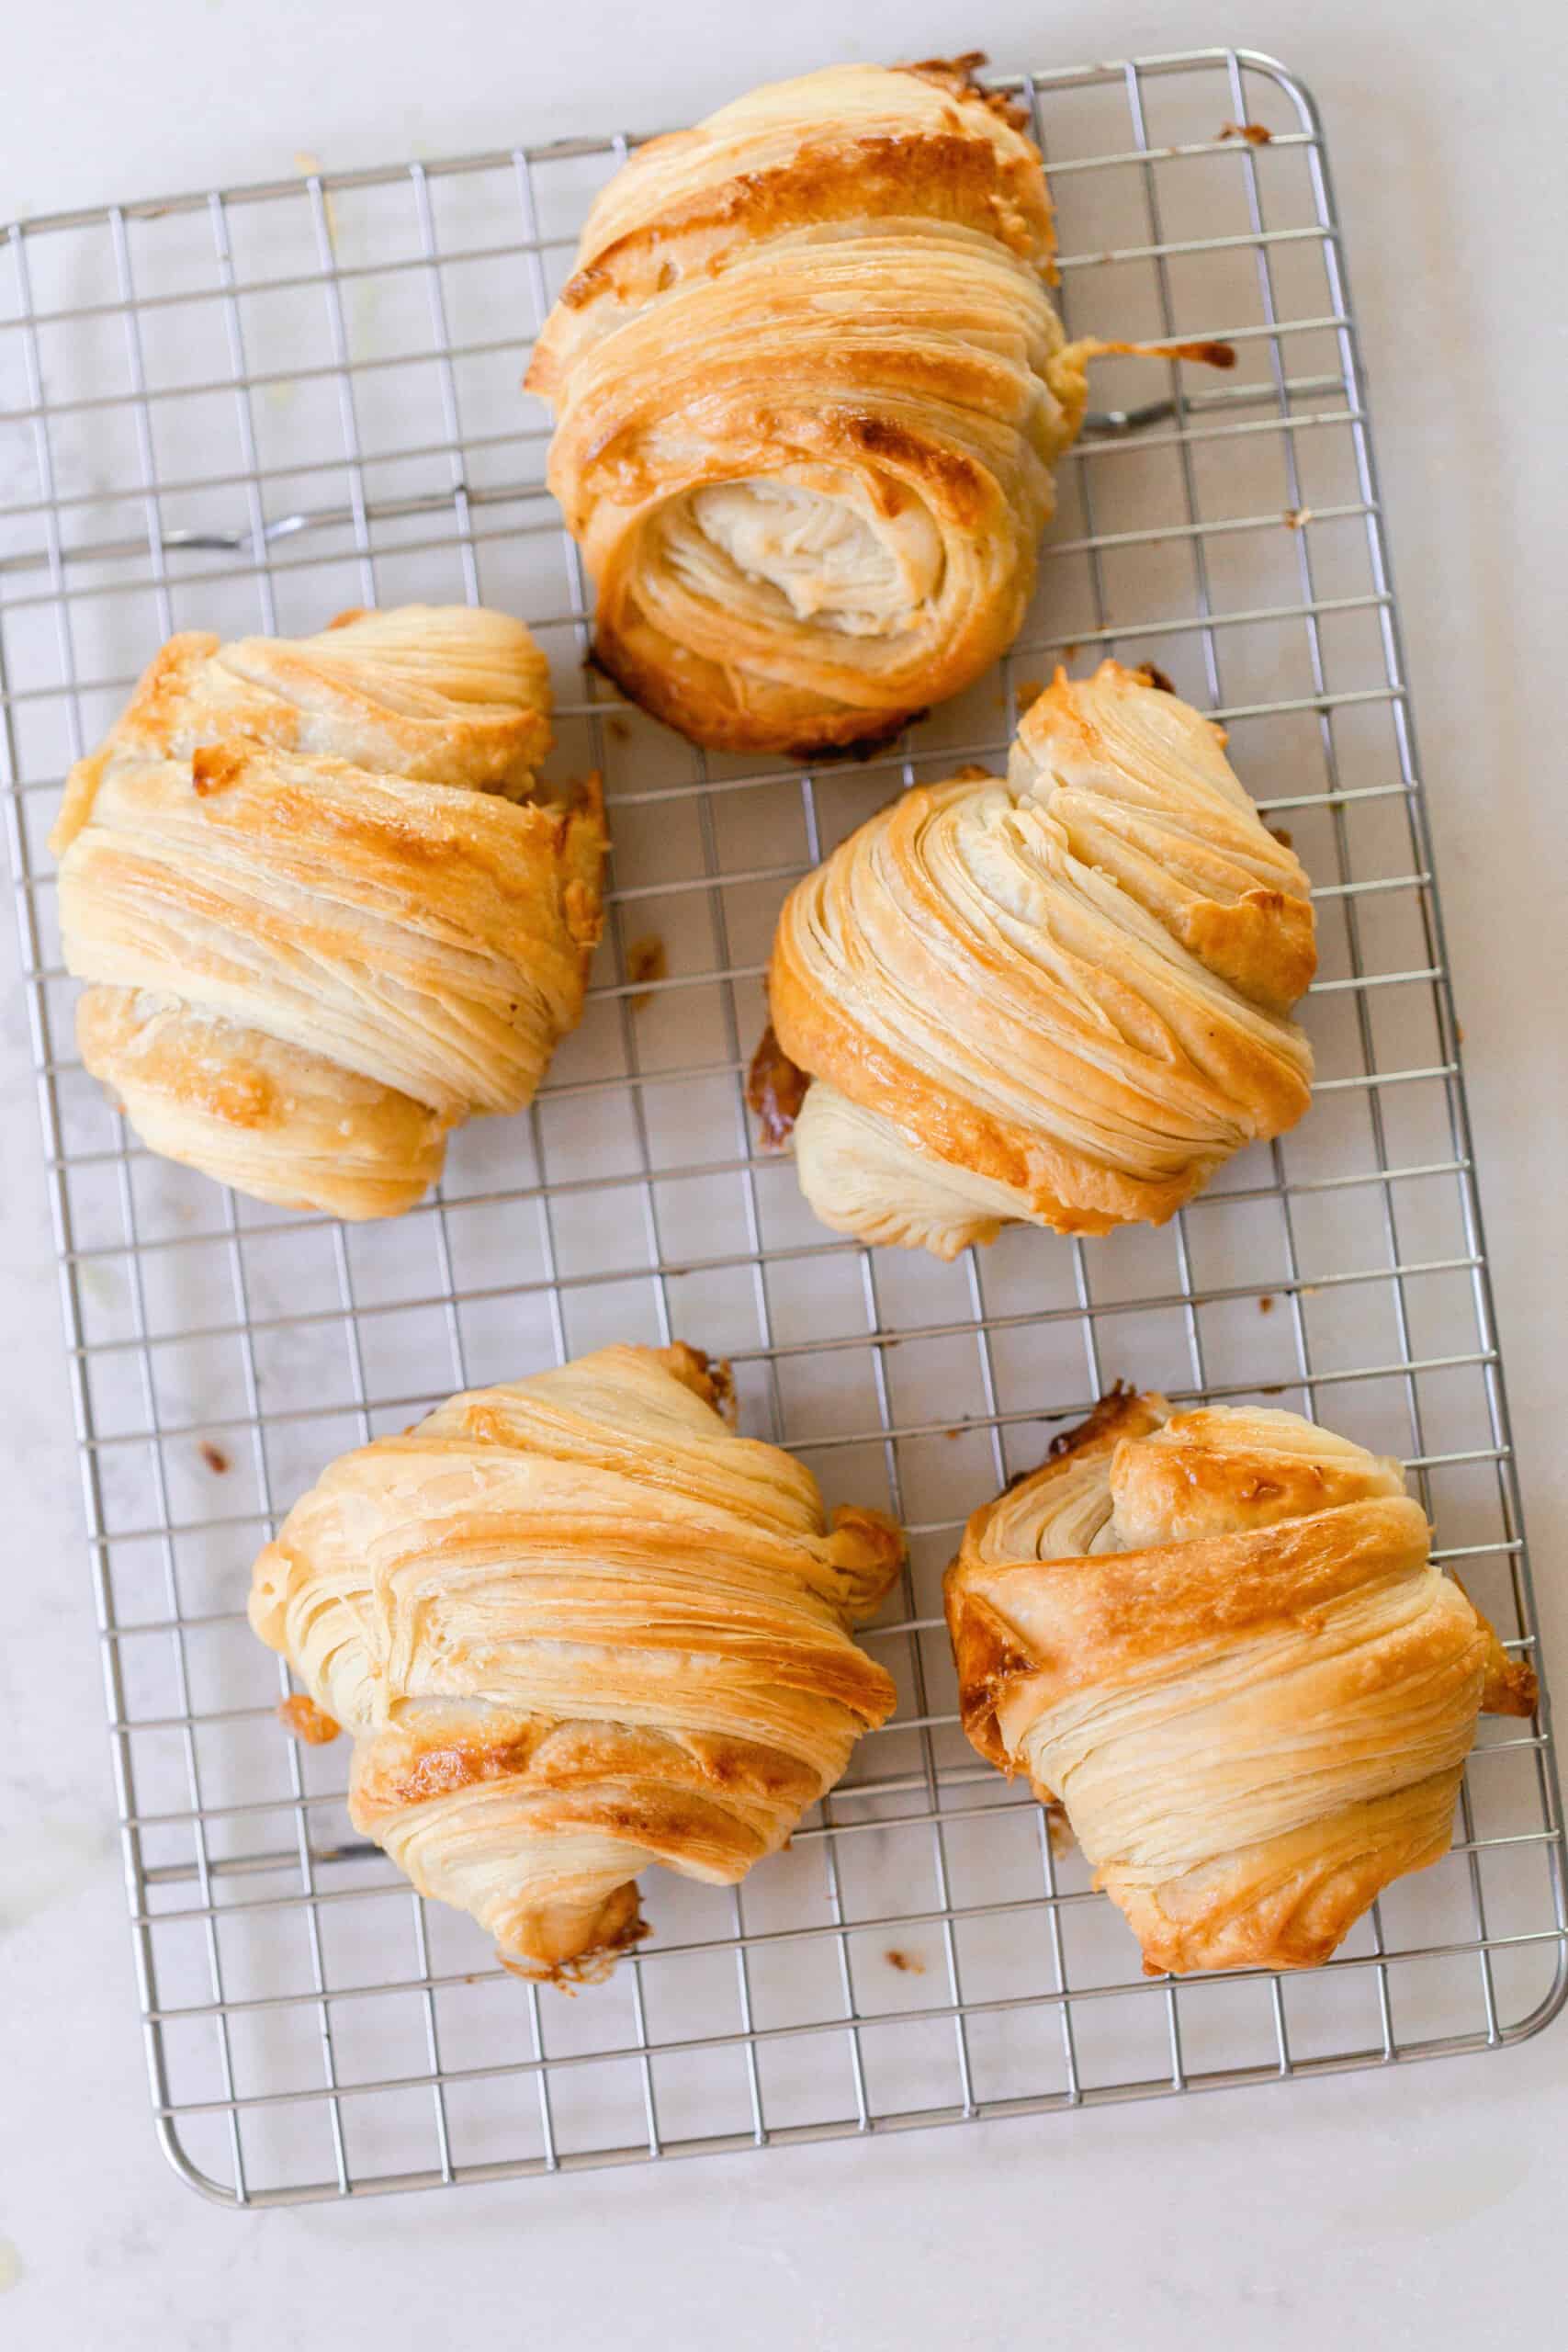 How to Make Croissants With a Stand Mixer